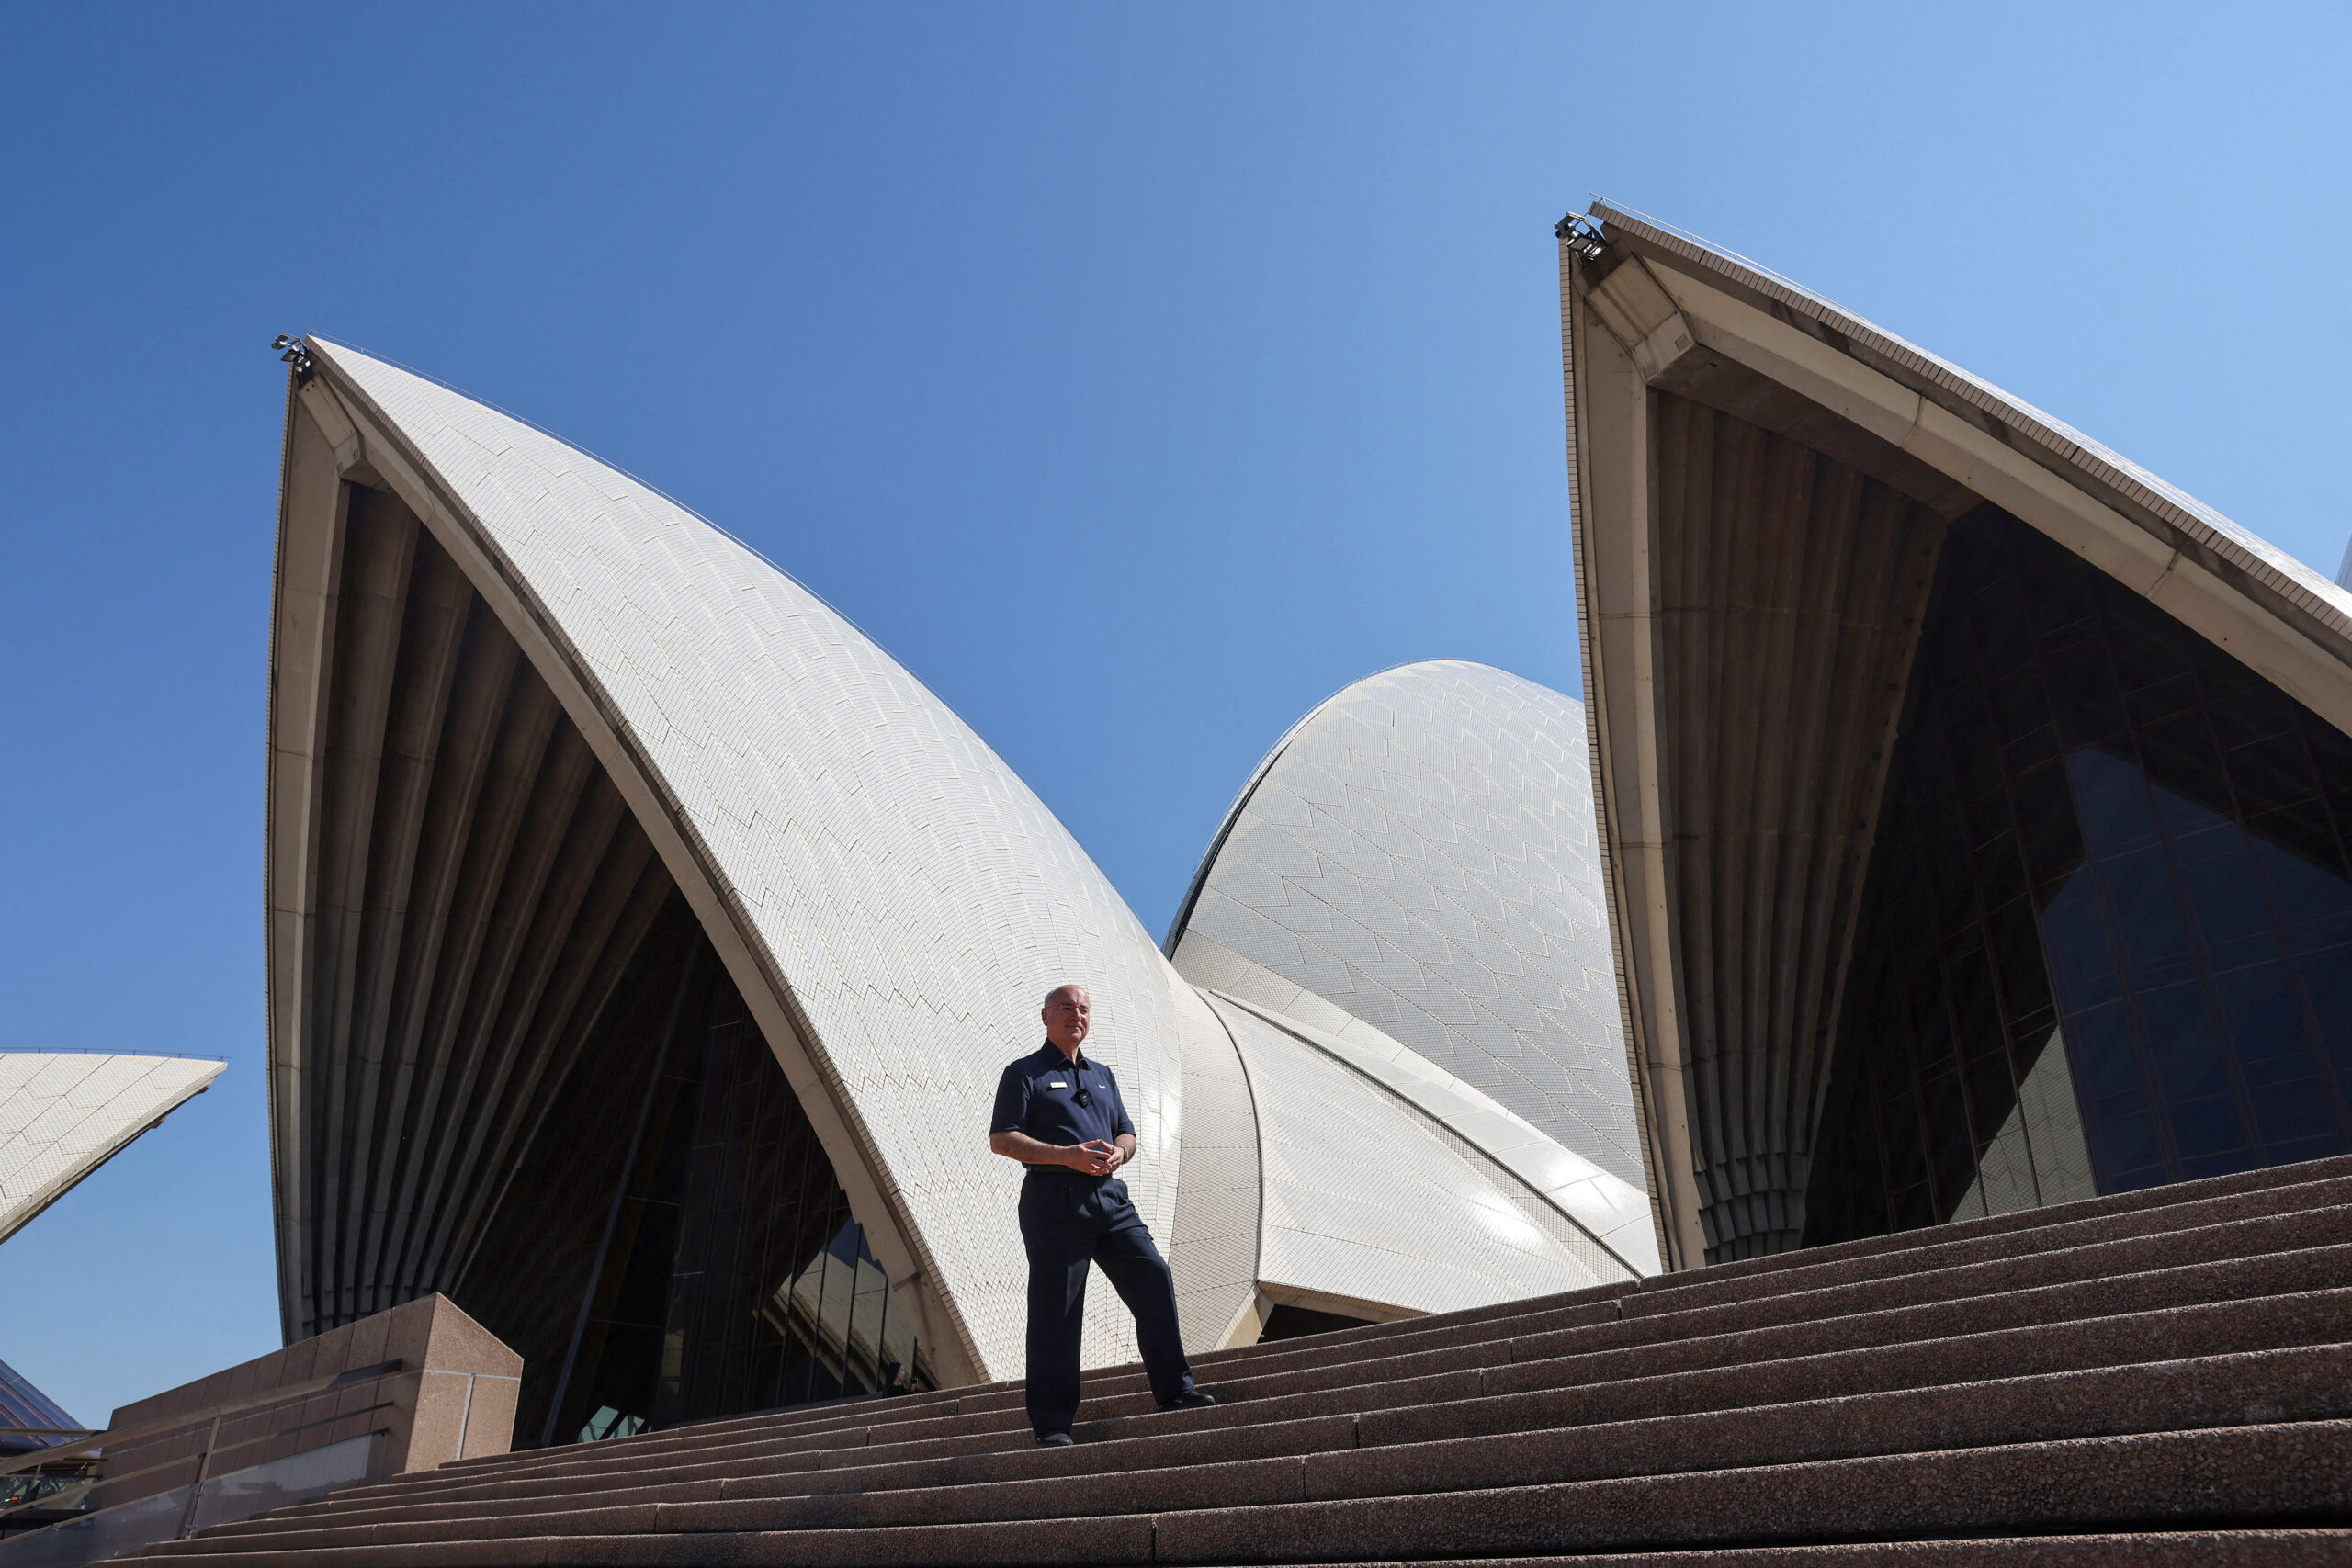 Sydney Opera House celebrates 50th birthday with light show and free tours